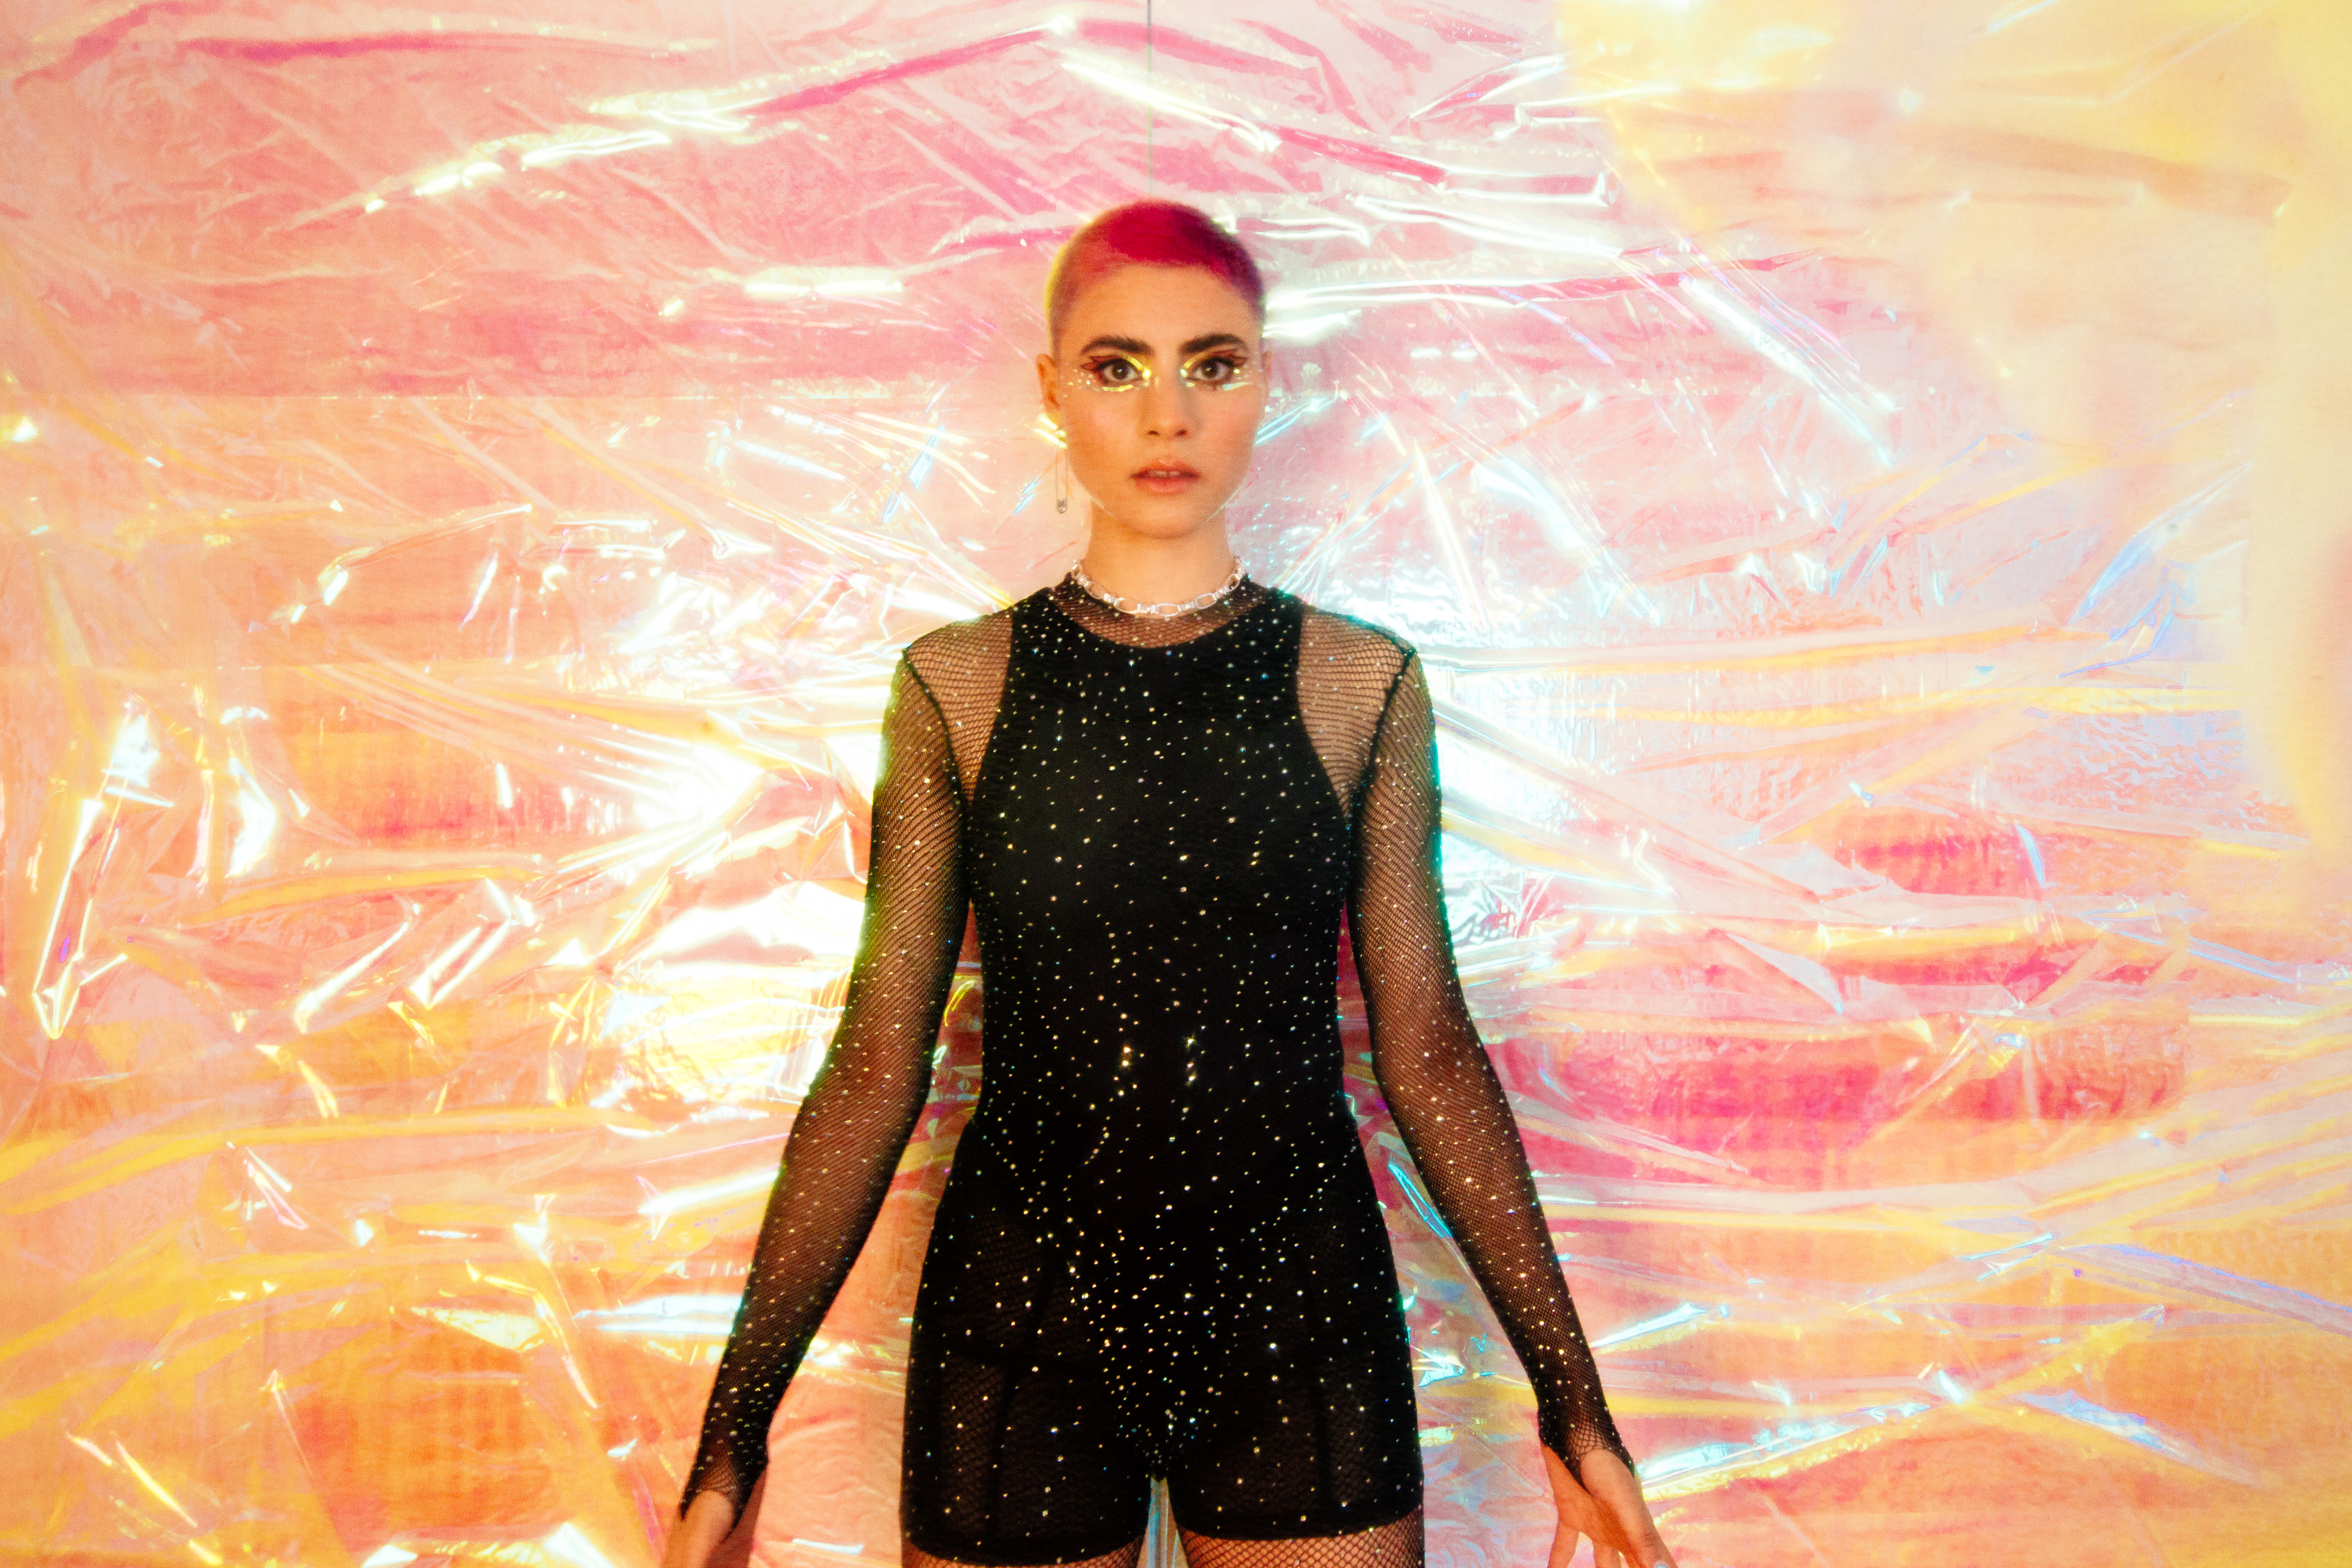 Montaigne is a young woman with short hair in a rainbow of bright colours. She wears a sparkly black bodysuit and stares directly into camera with a background that looks like pink and yellow pearlescent cellophane.